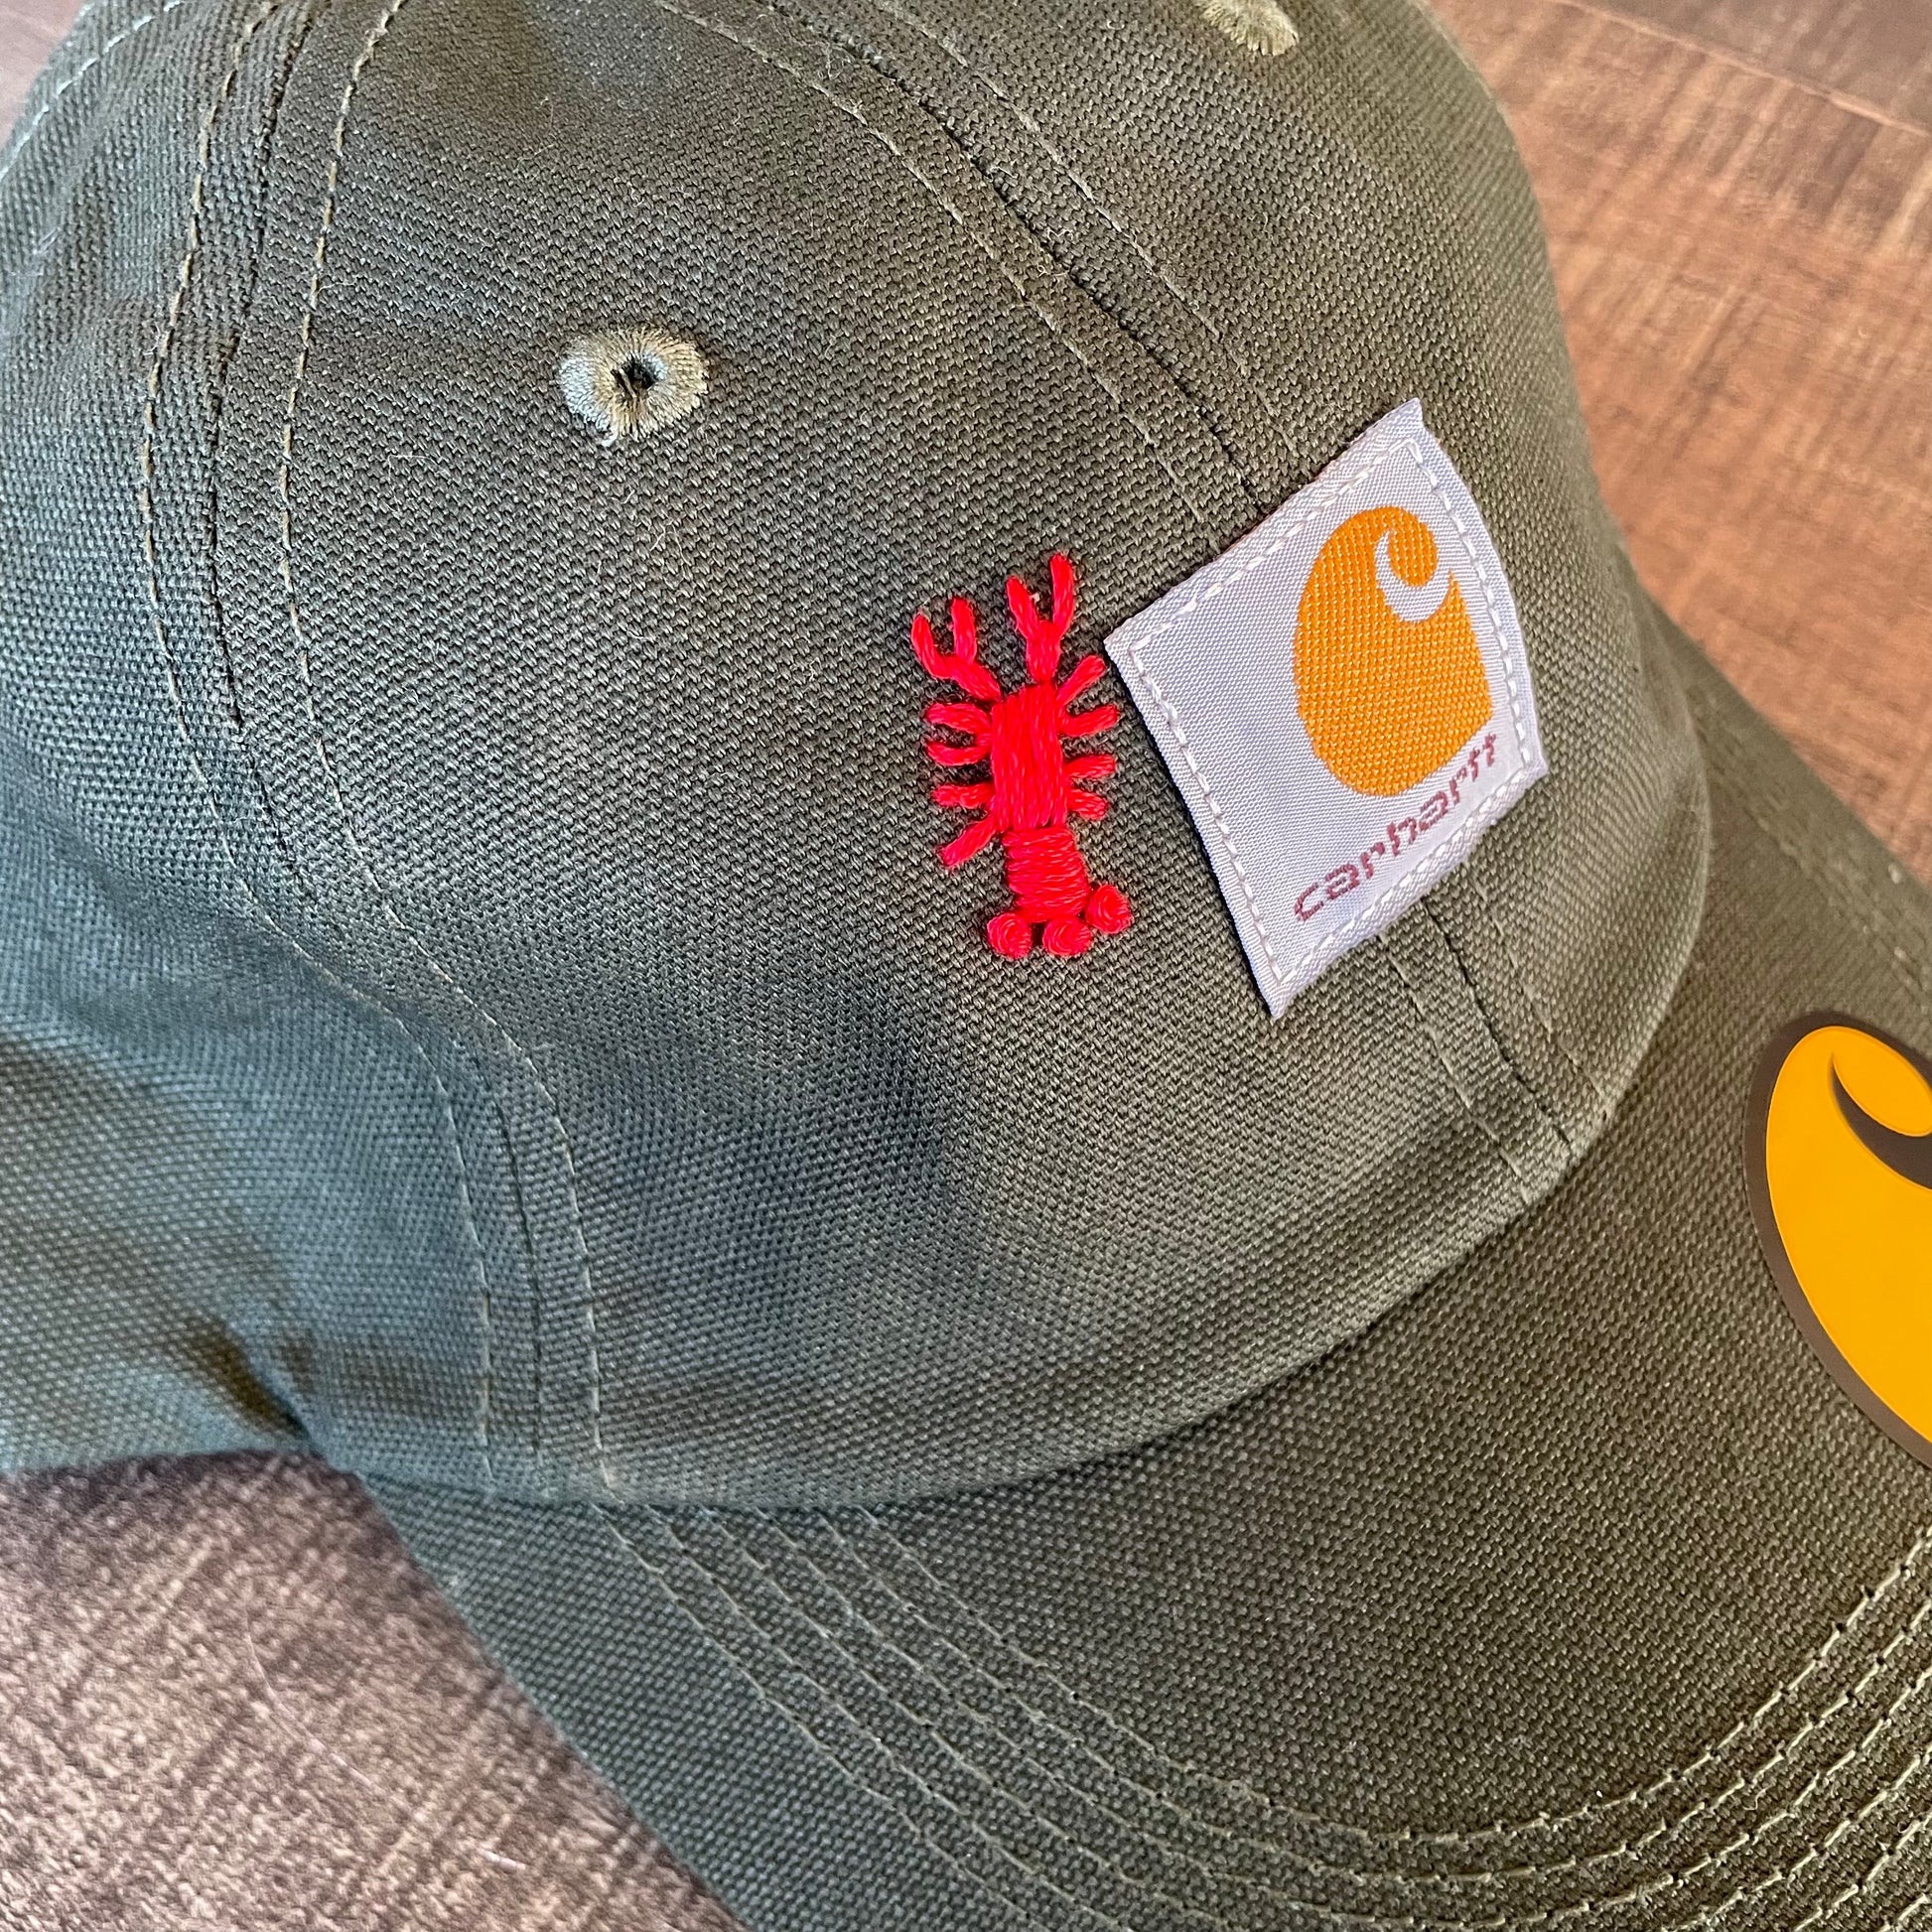 Lobster Embroidered Carhartt Hat - Sew Fetch Dog Company